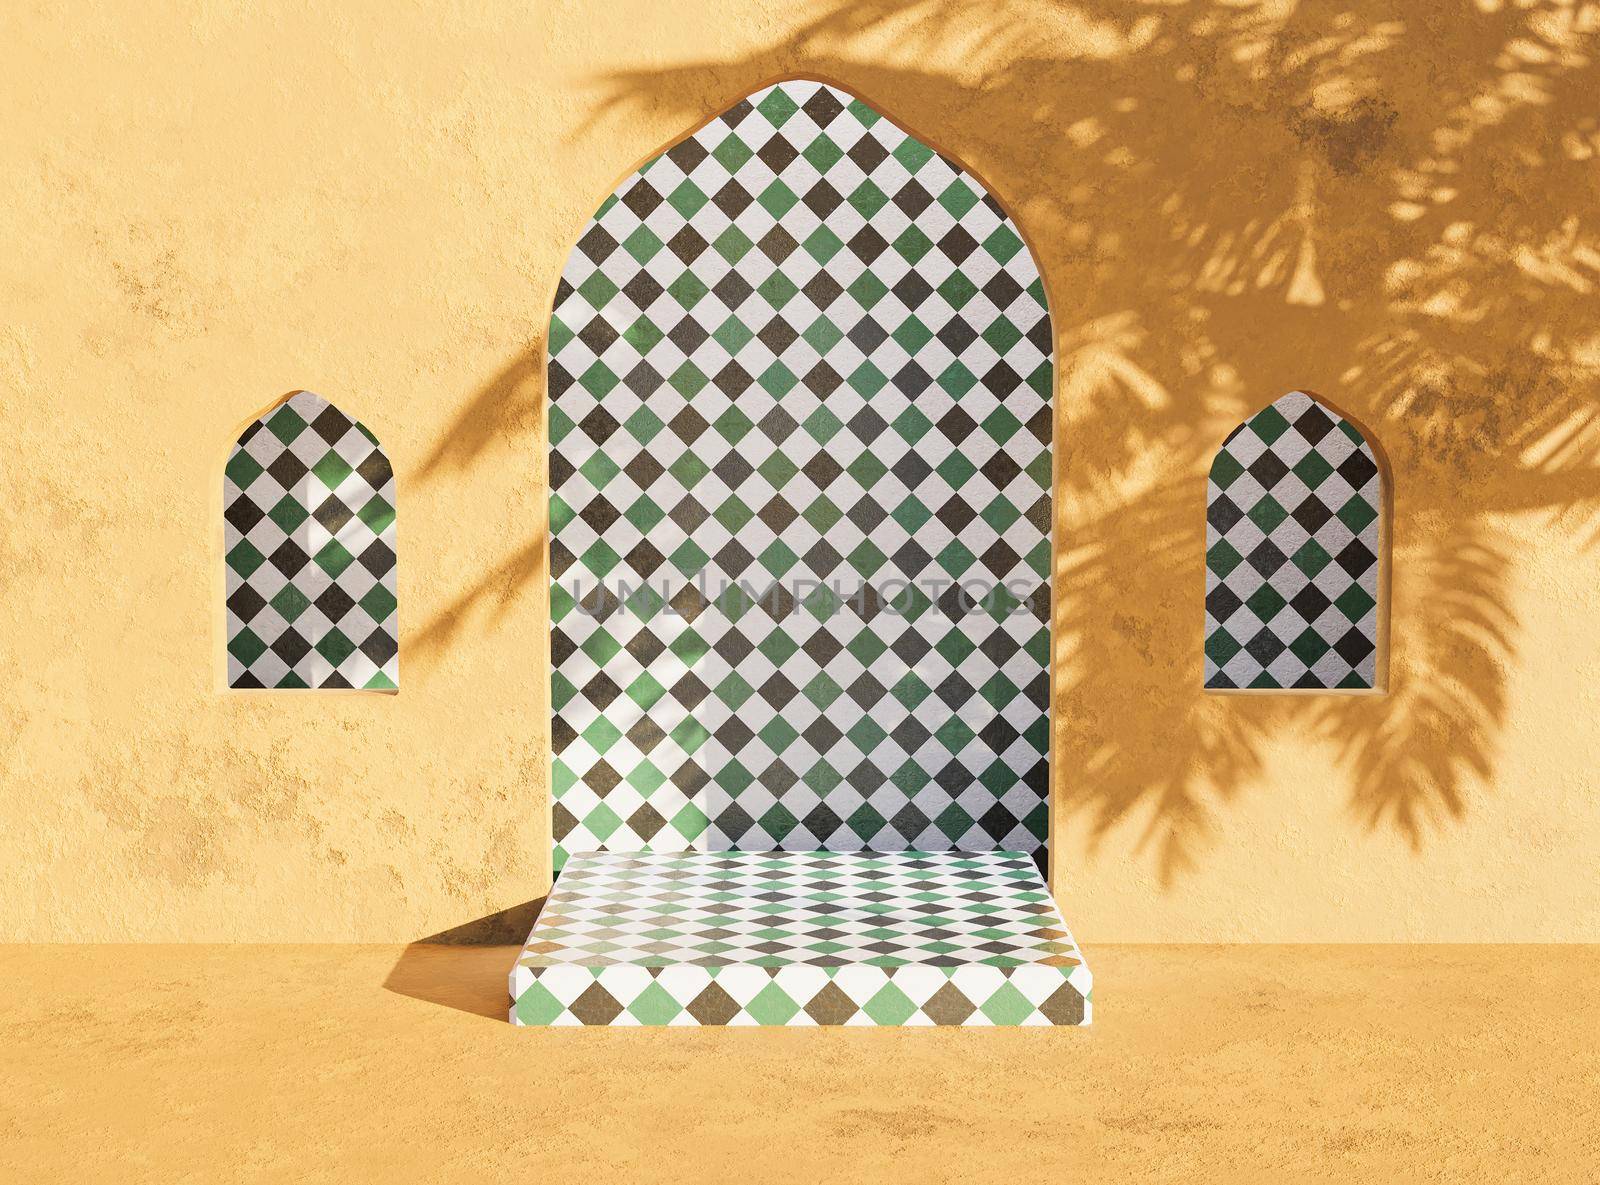 arabian style product presentation stand with palm tree shade. 3d rendering